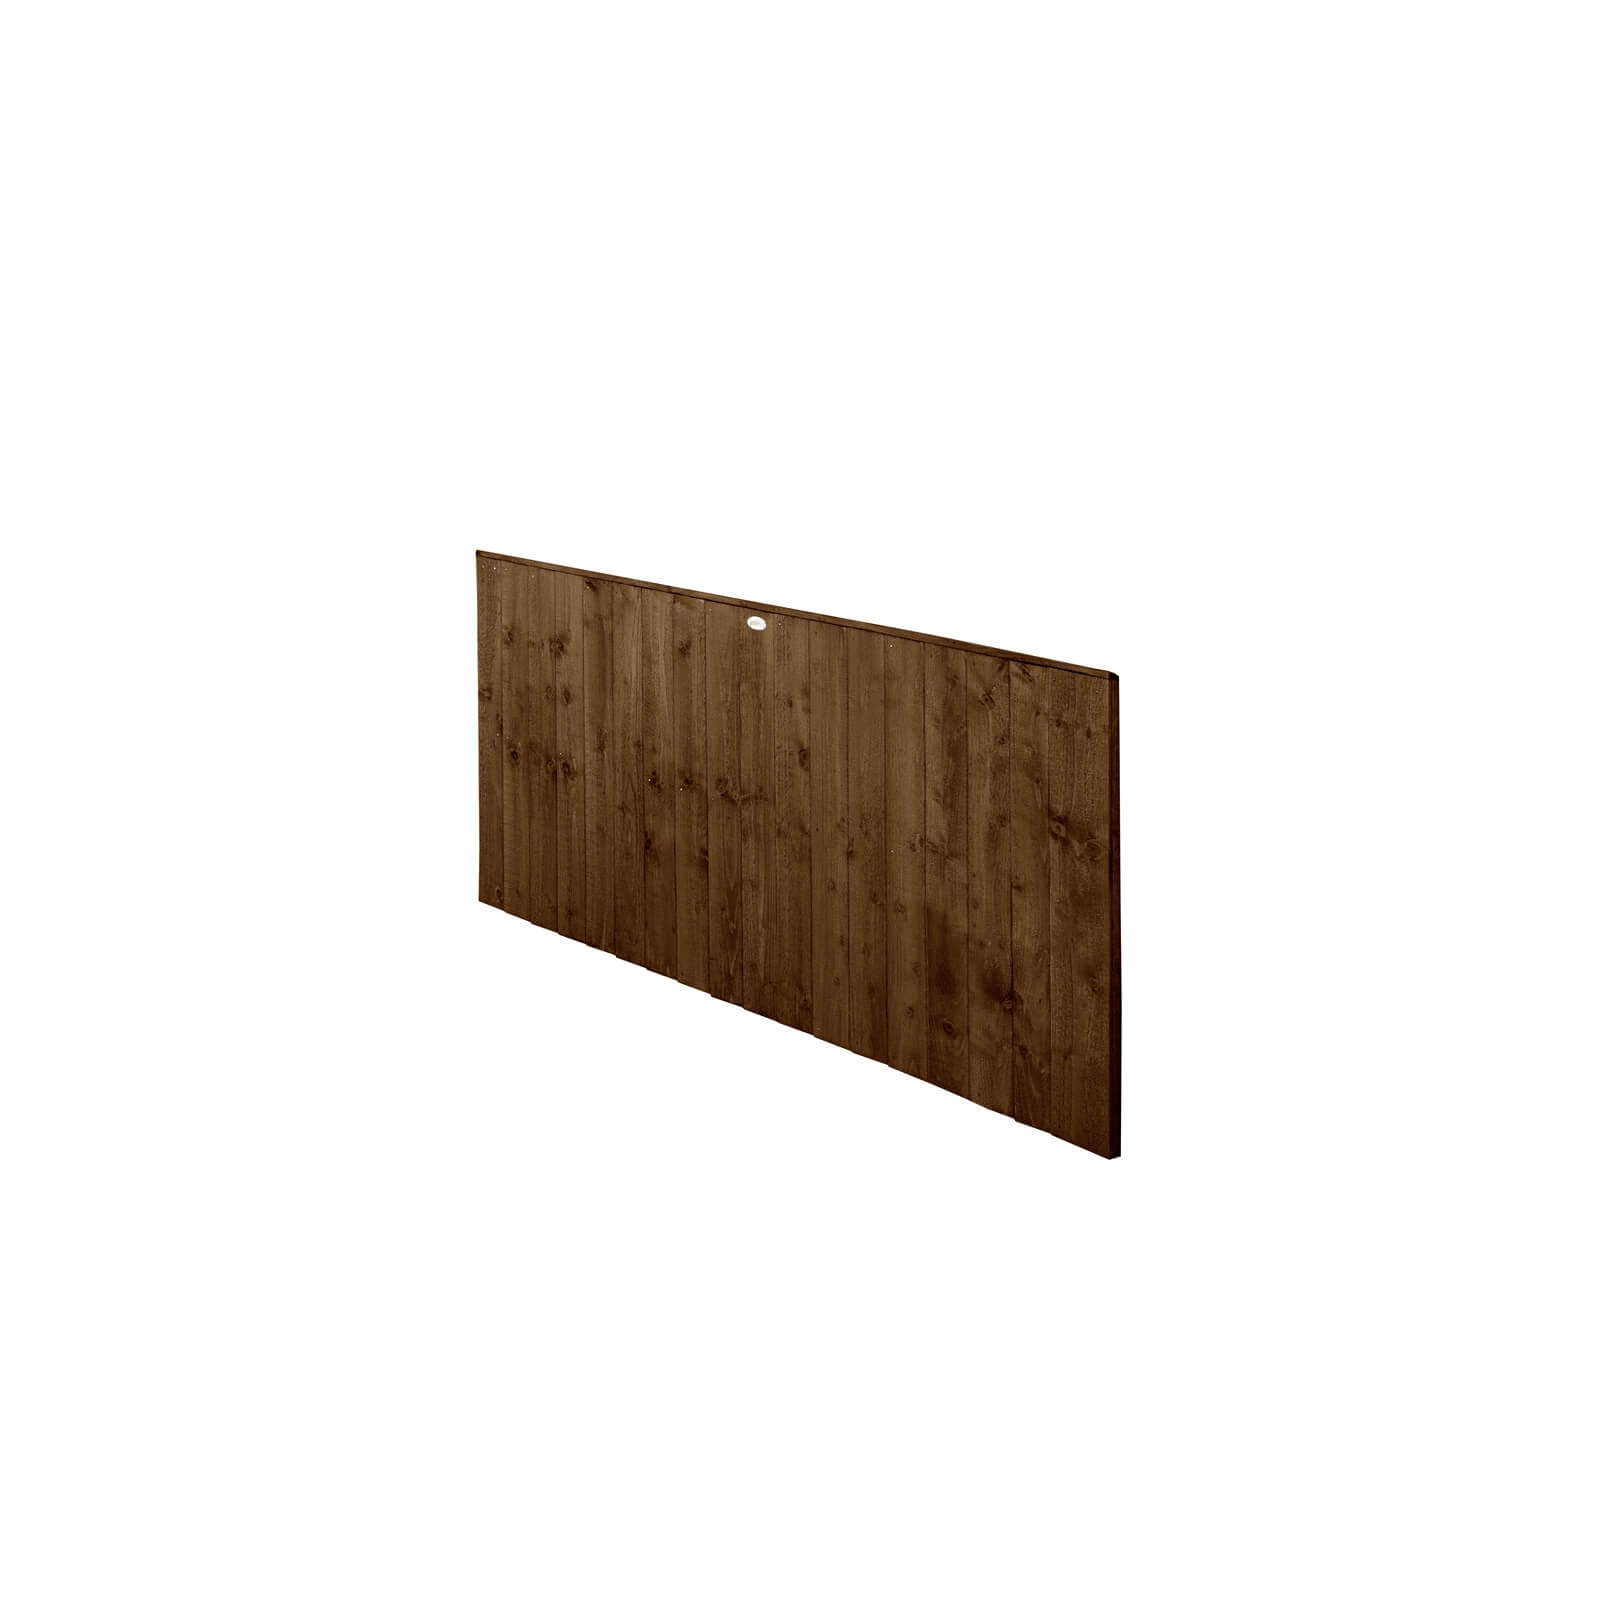 6ft x 3ft (1.83m x 0.93m) Pressure Treated Featheredge Fence Panel (Dark Brown) - Pack of 20